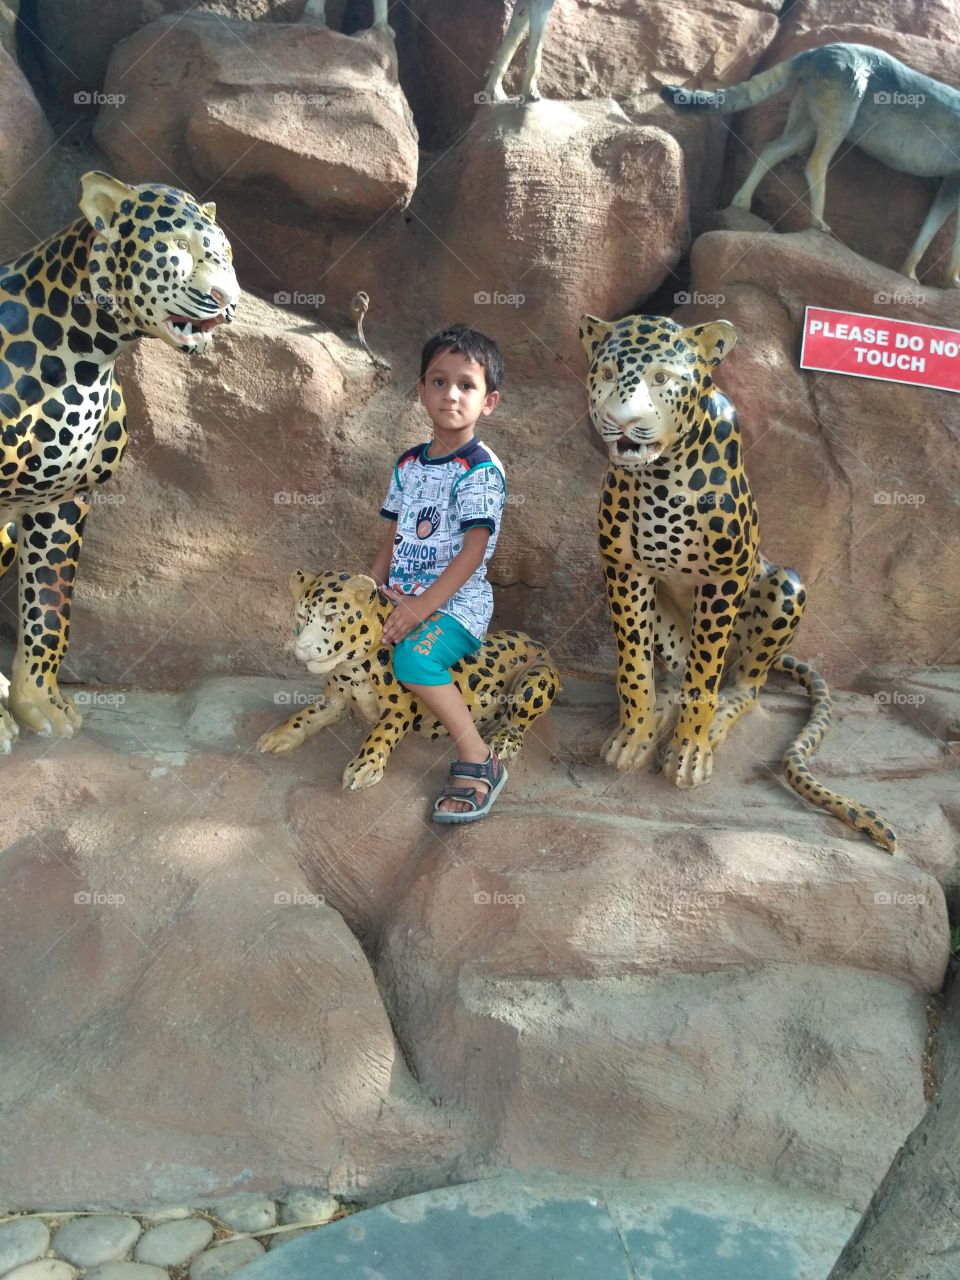 Playing in zoo